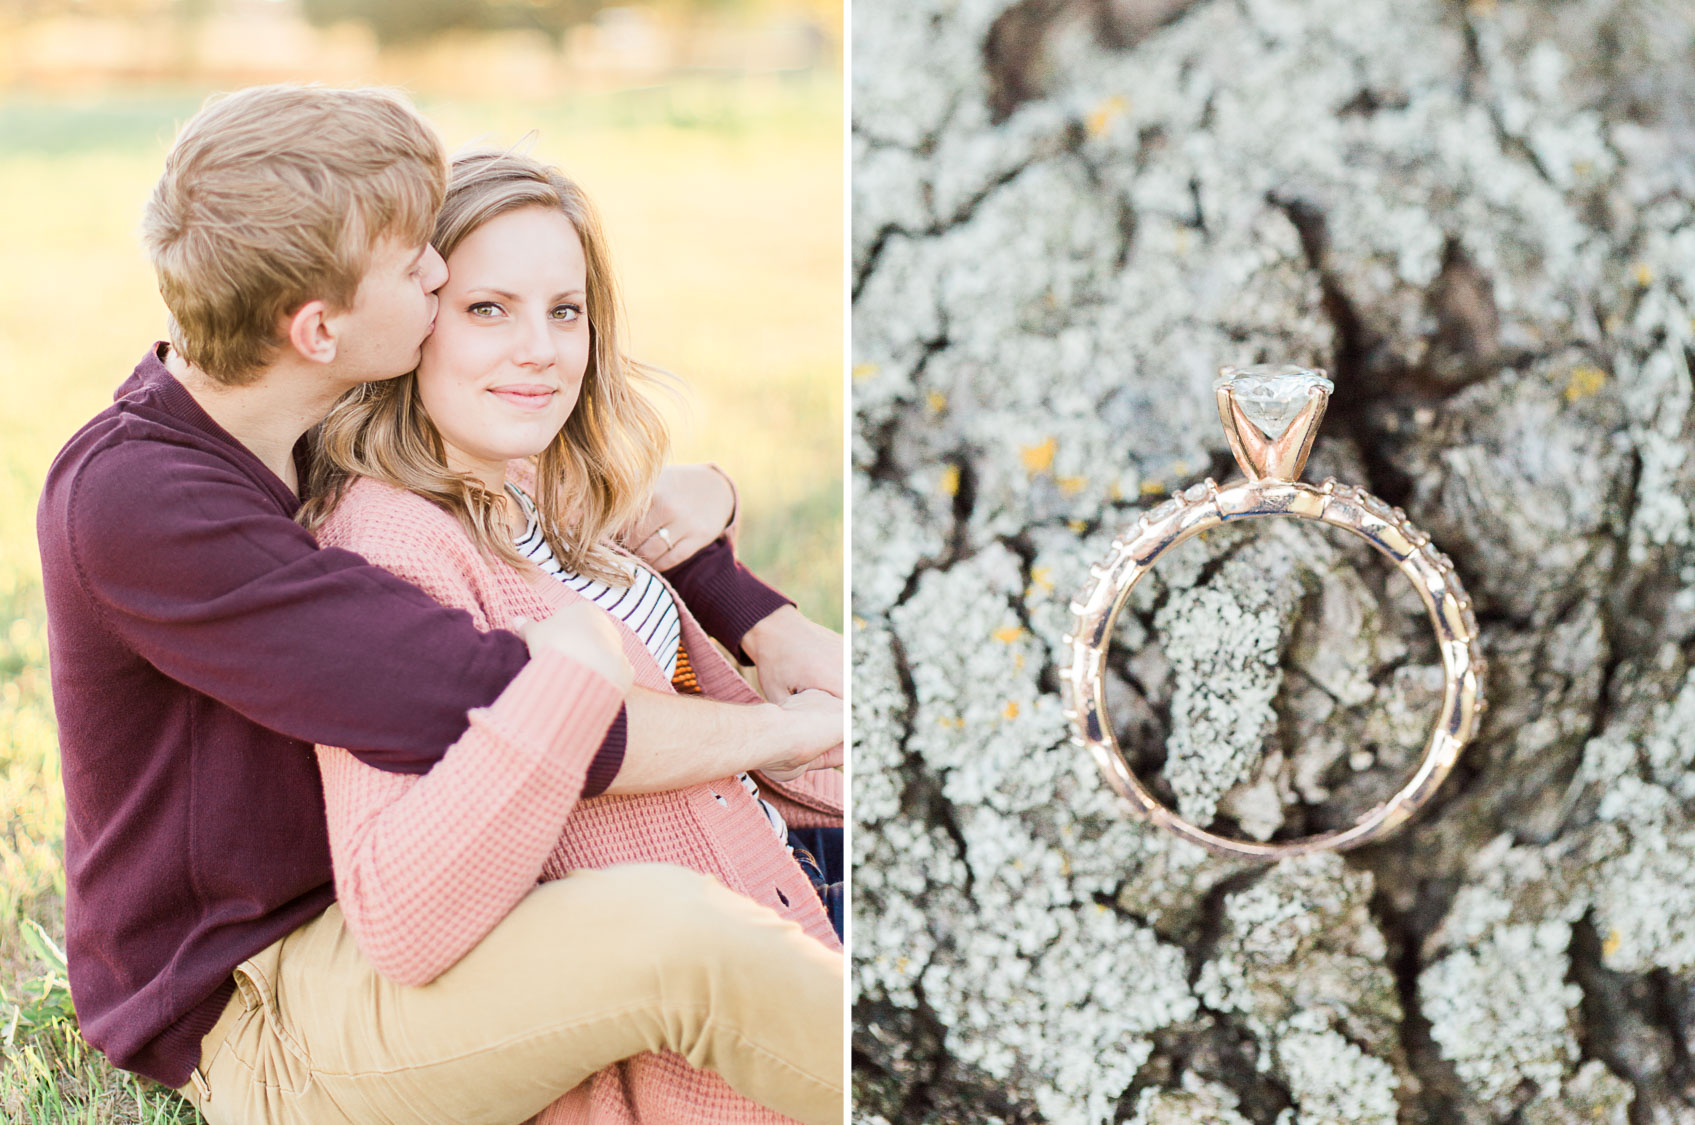 Andrew and Hannah Engagement Photos - Fort Worth Wedding Photographer - Fort Worth Engagement Photographer - College Station - Bryan - Houston - Dallas - Fort Worth - Wedding Photographer - Texas Wedding Photographer - Research Park - Aggie Engagement Session